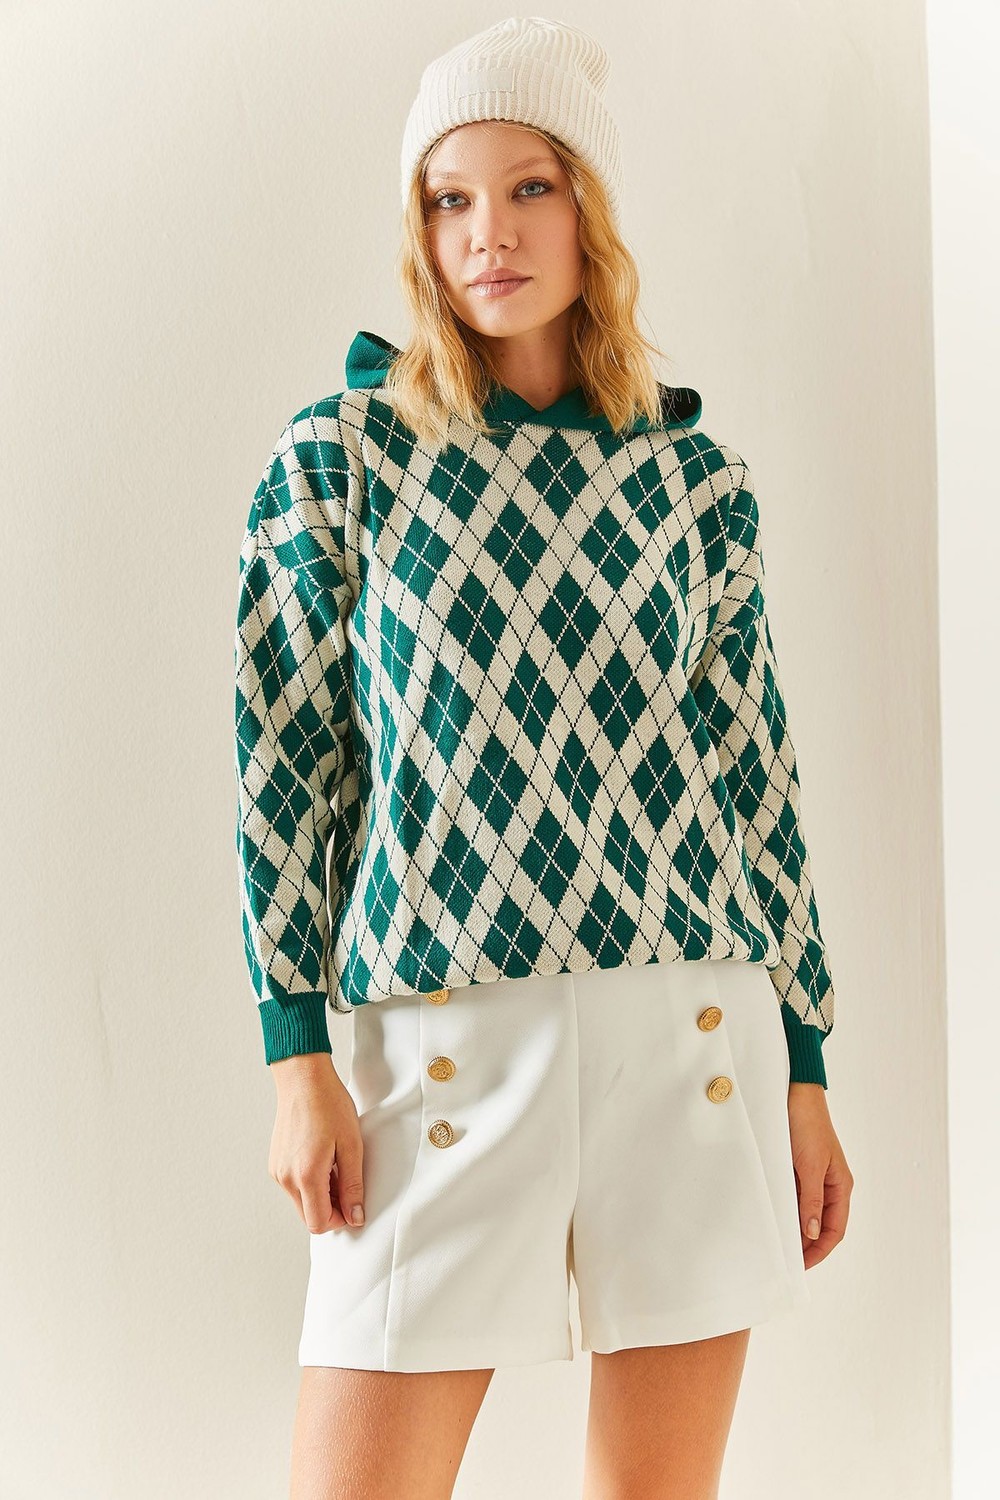 XHAN Green Patterned & Hooded Sweater